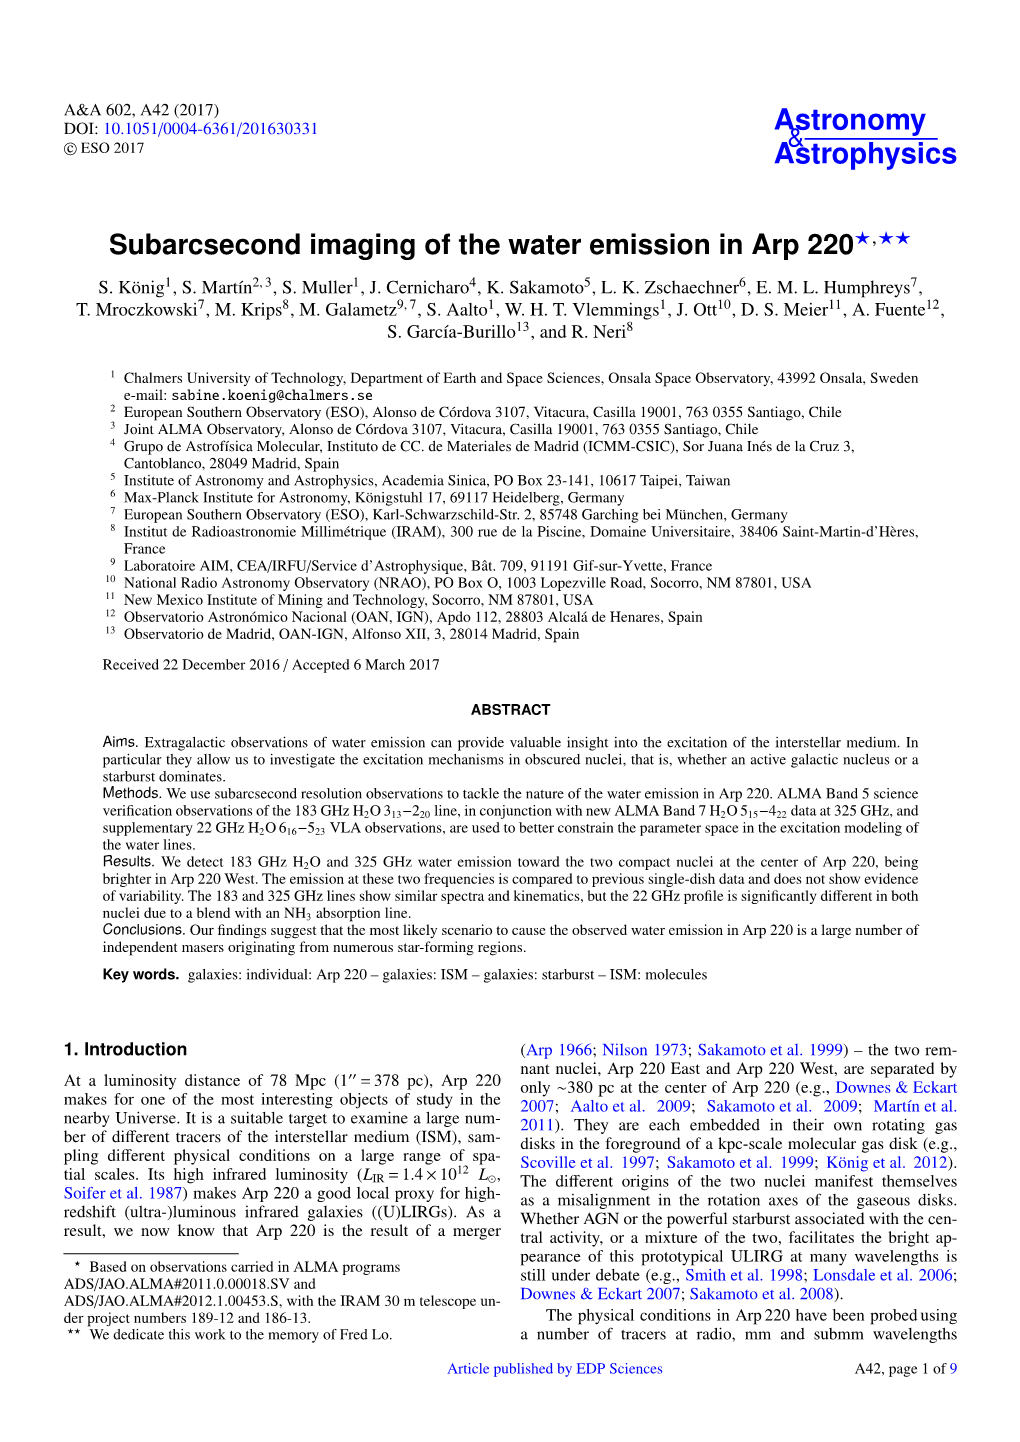 Subarcsecond Imaging of the Water Emission in Arp 220?,?? S